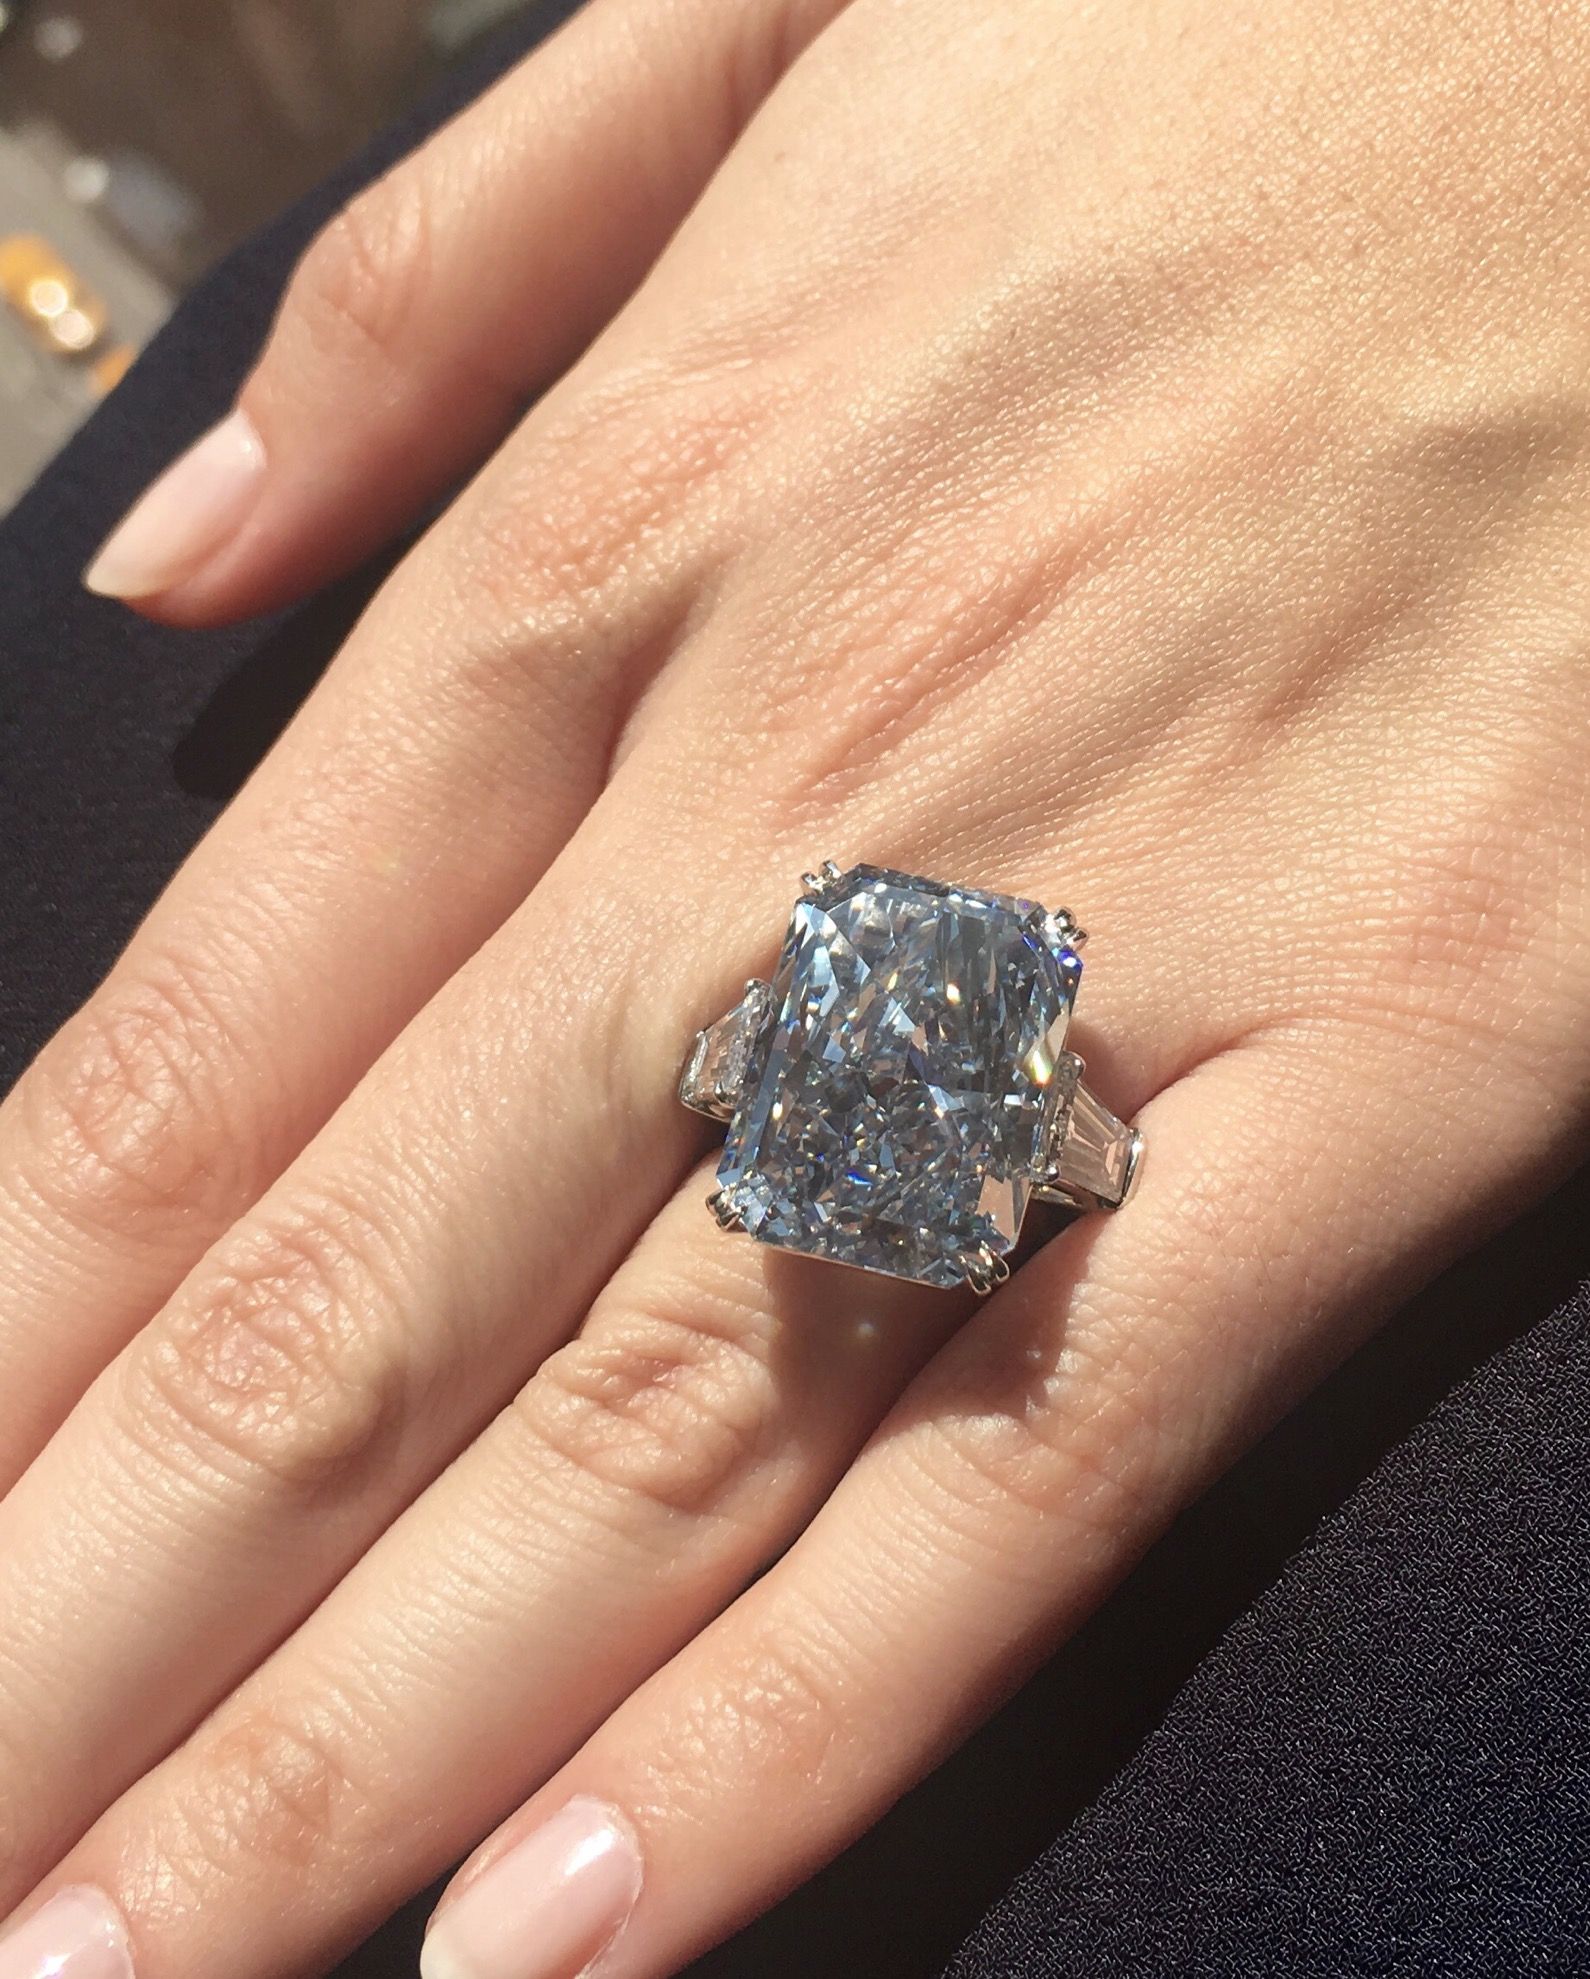 The 24 Carat Cullinan Dream The Largest Fancy Intense Blue